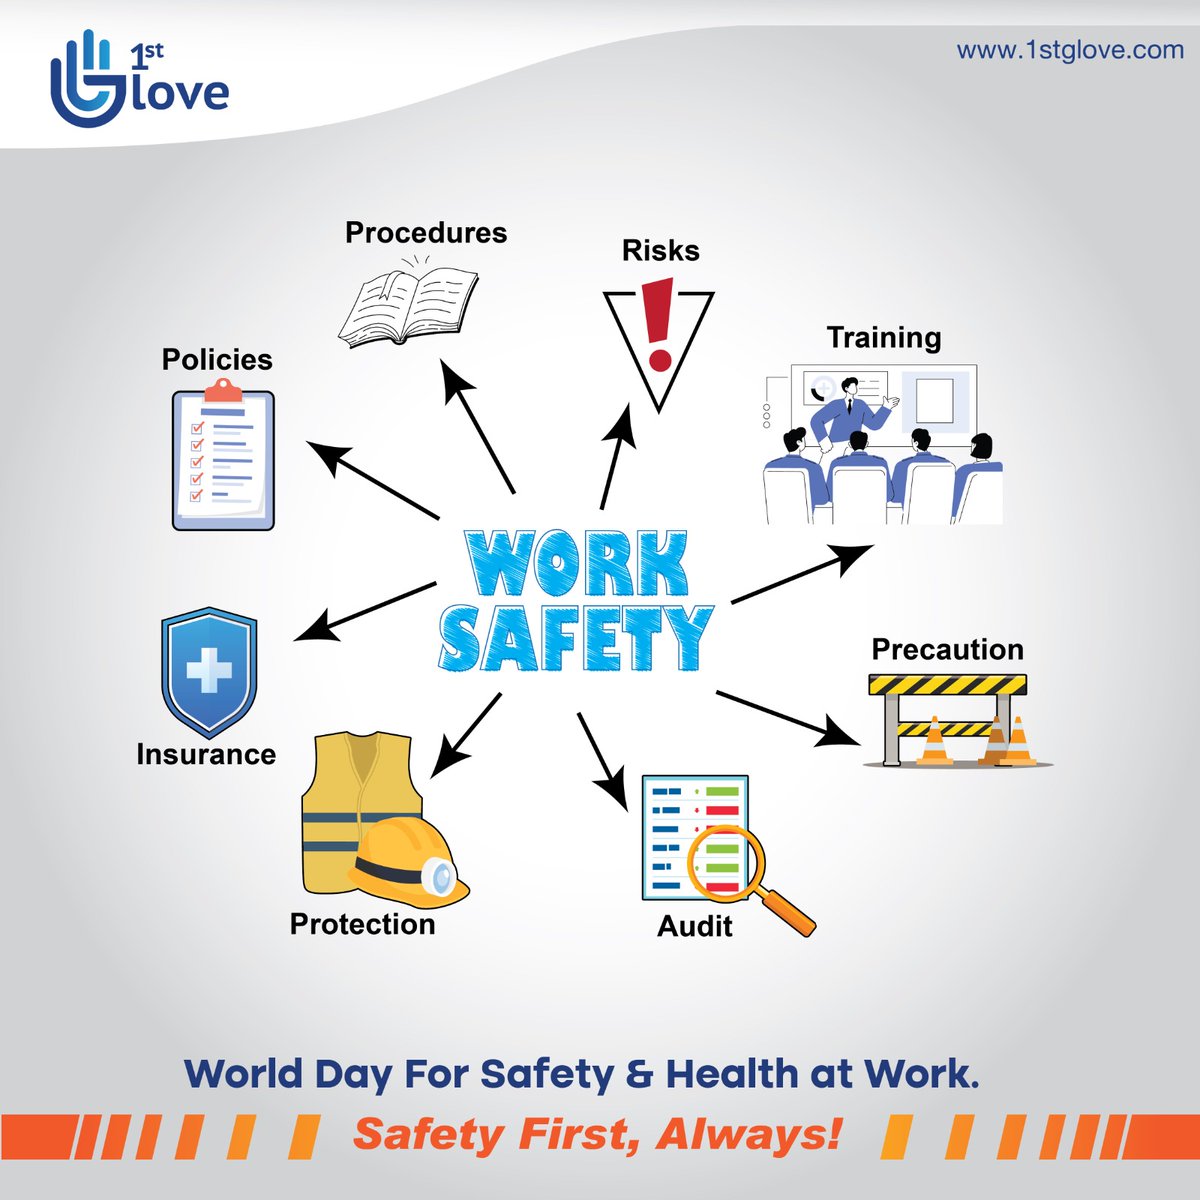 A safe workplace is a productive workplace. Let's prioritize safety together. 
#WorldDayforSafetyandHealthatWork #SafetyFirst #Health #employees #WorkplaceSafety